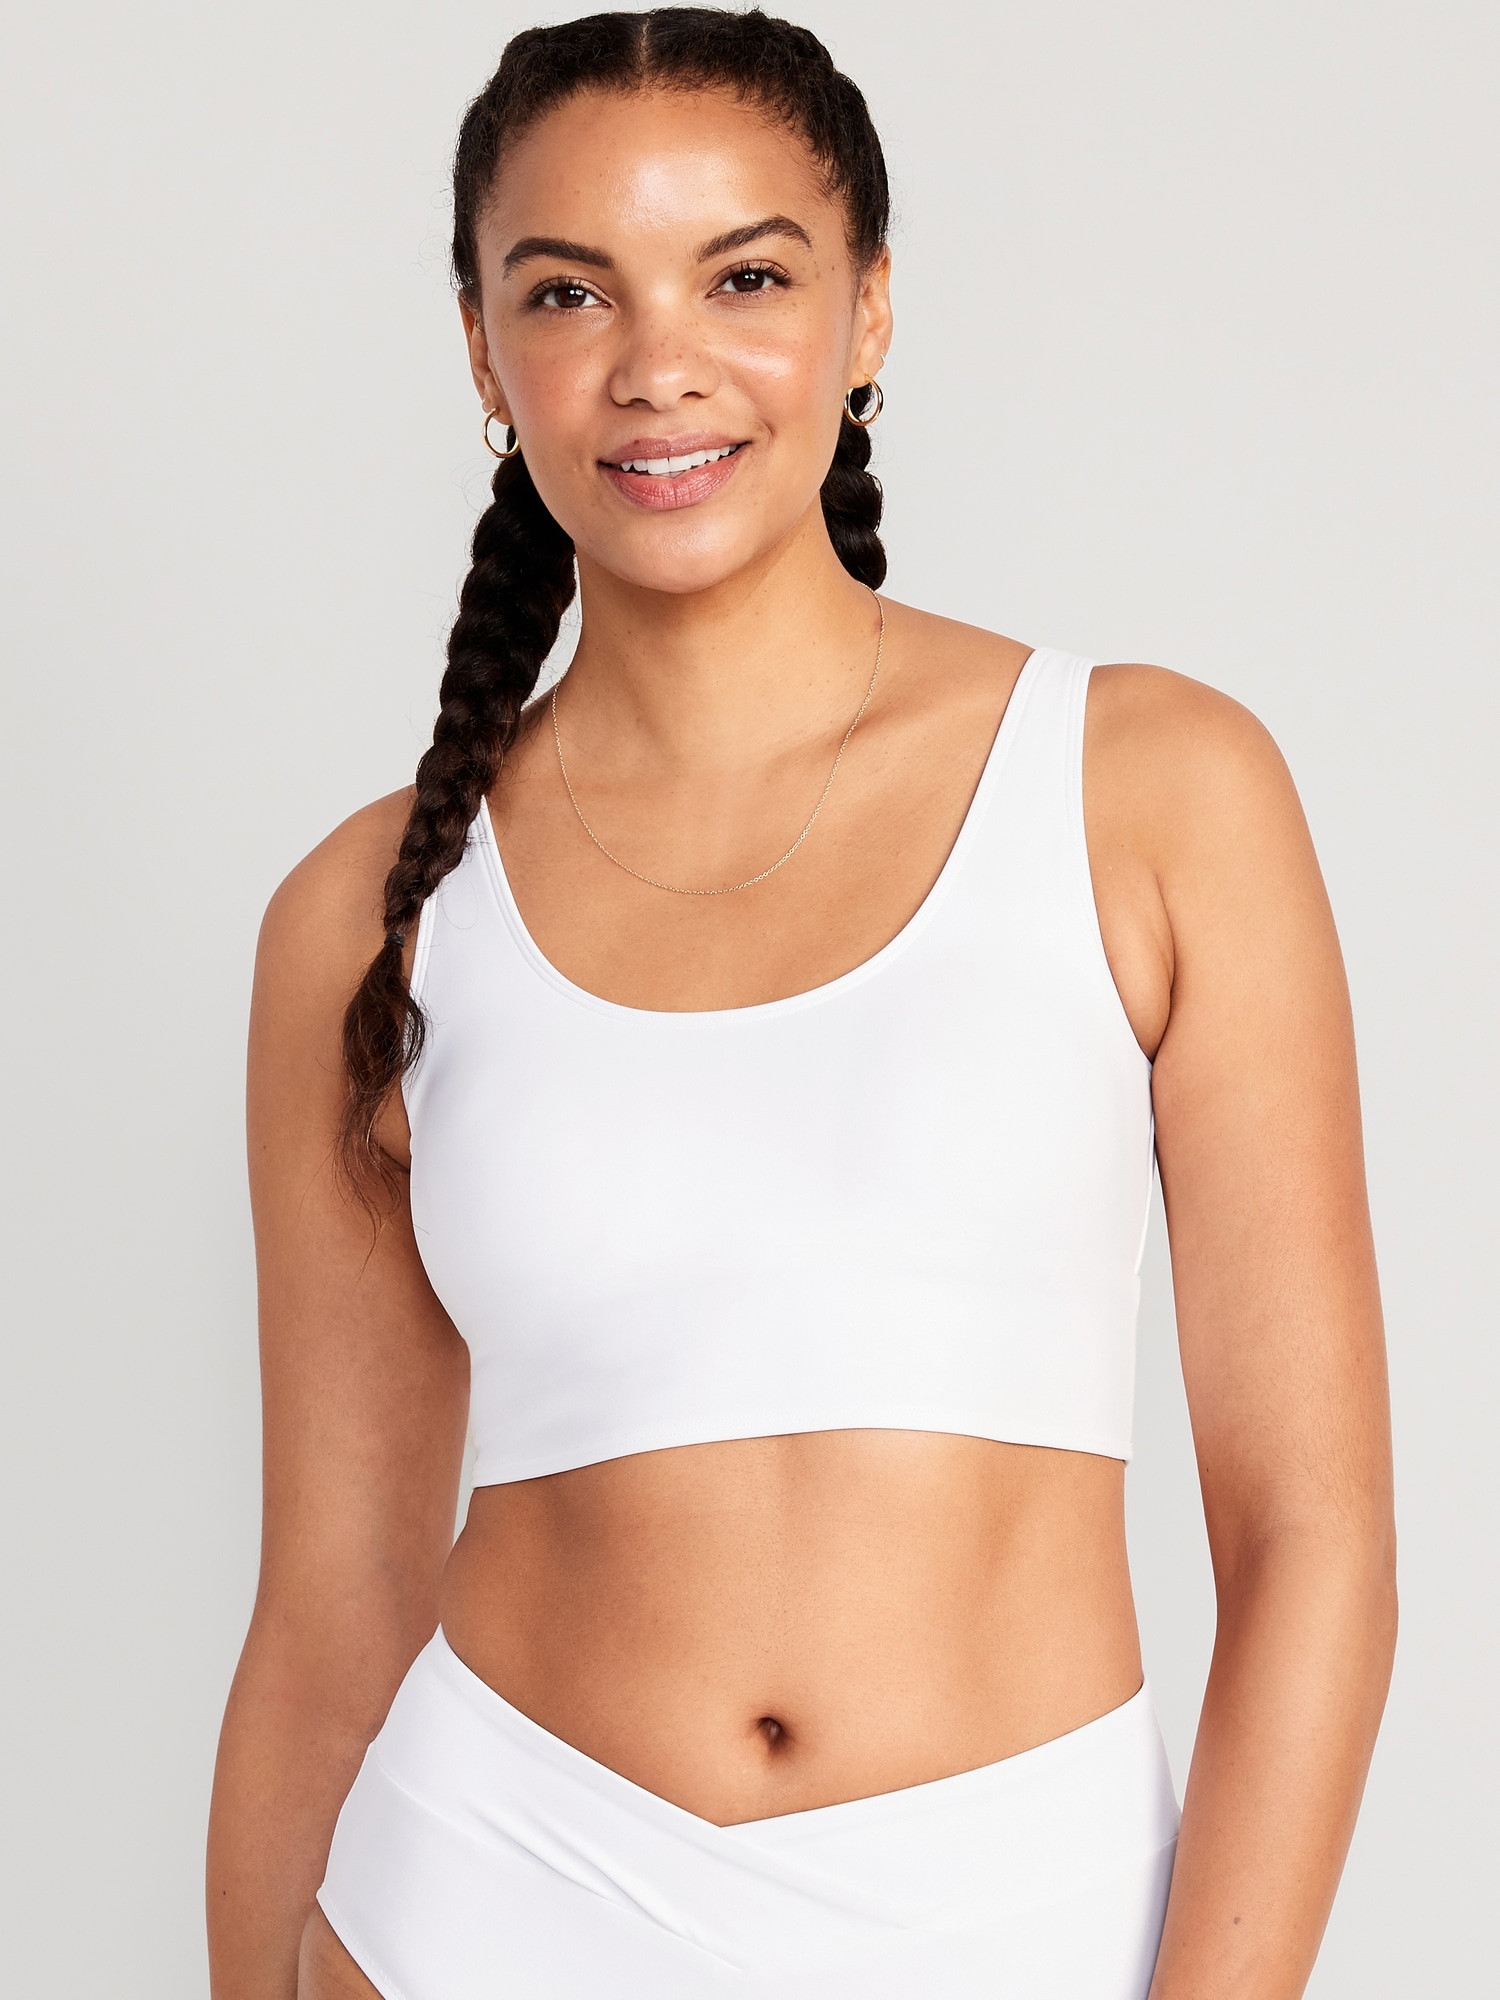 Uniqlo high neck swimsuit top Black - $12 (40% Off Retail) New With Tags -  From Lauryn